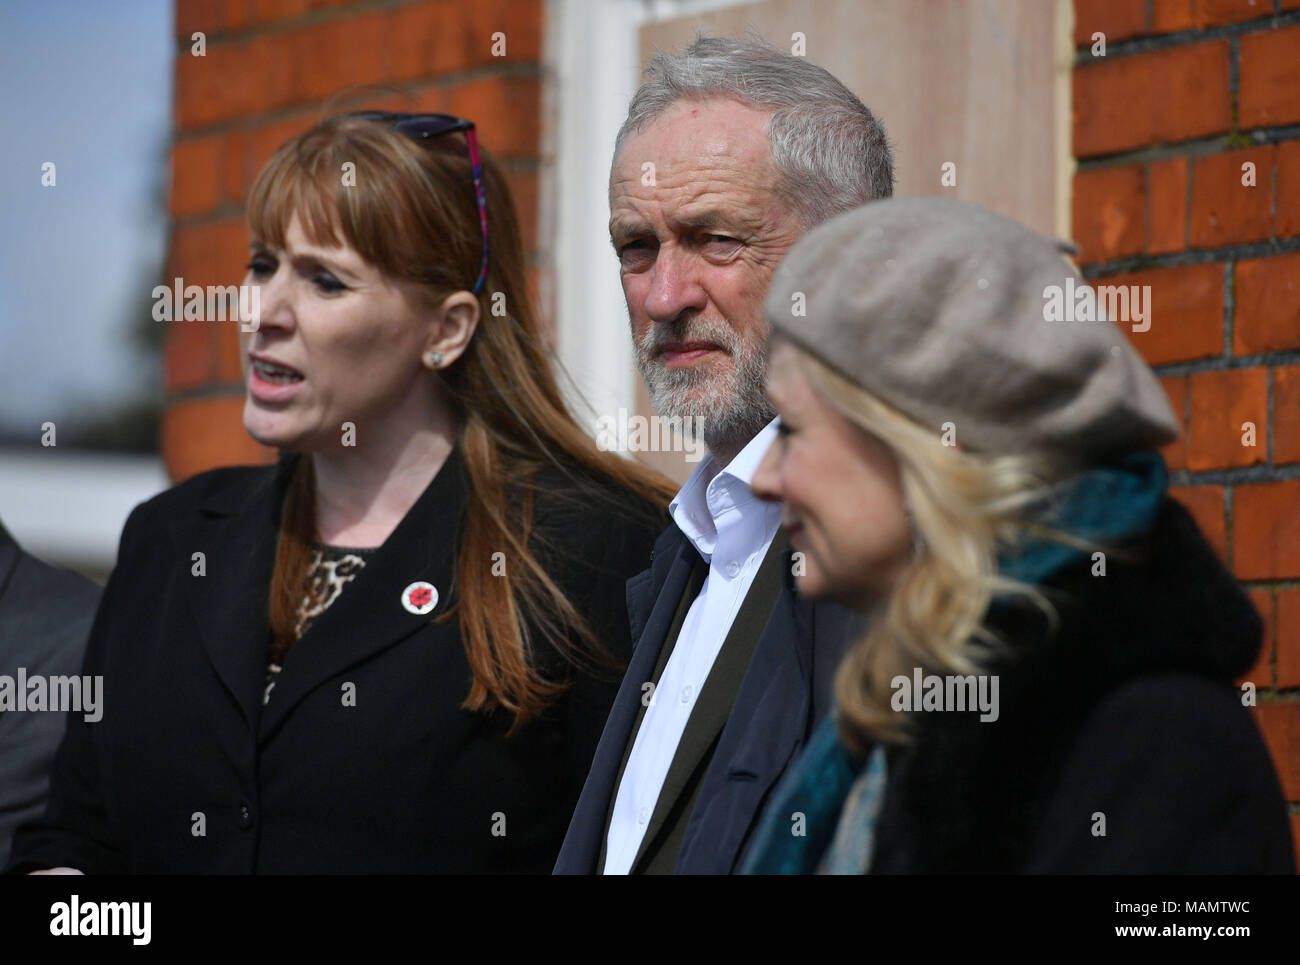 Labour leader Jeremy Corbyn with Shadow education secretary Angela Rayner (left) and MP for Batley and Spen Tracy Brabin (right) speaking outside The Old Pinehurst Library in Swindon about Labour's fight against cuts to Children and Young Peoples Services. Stock Photo